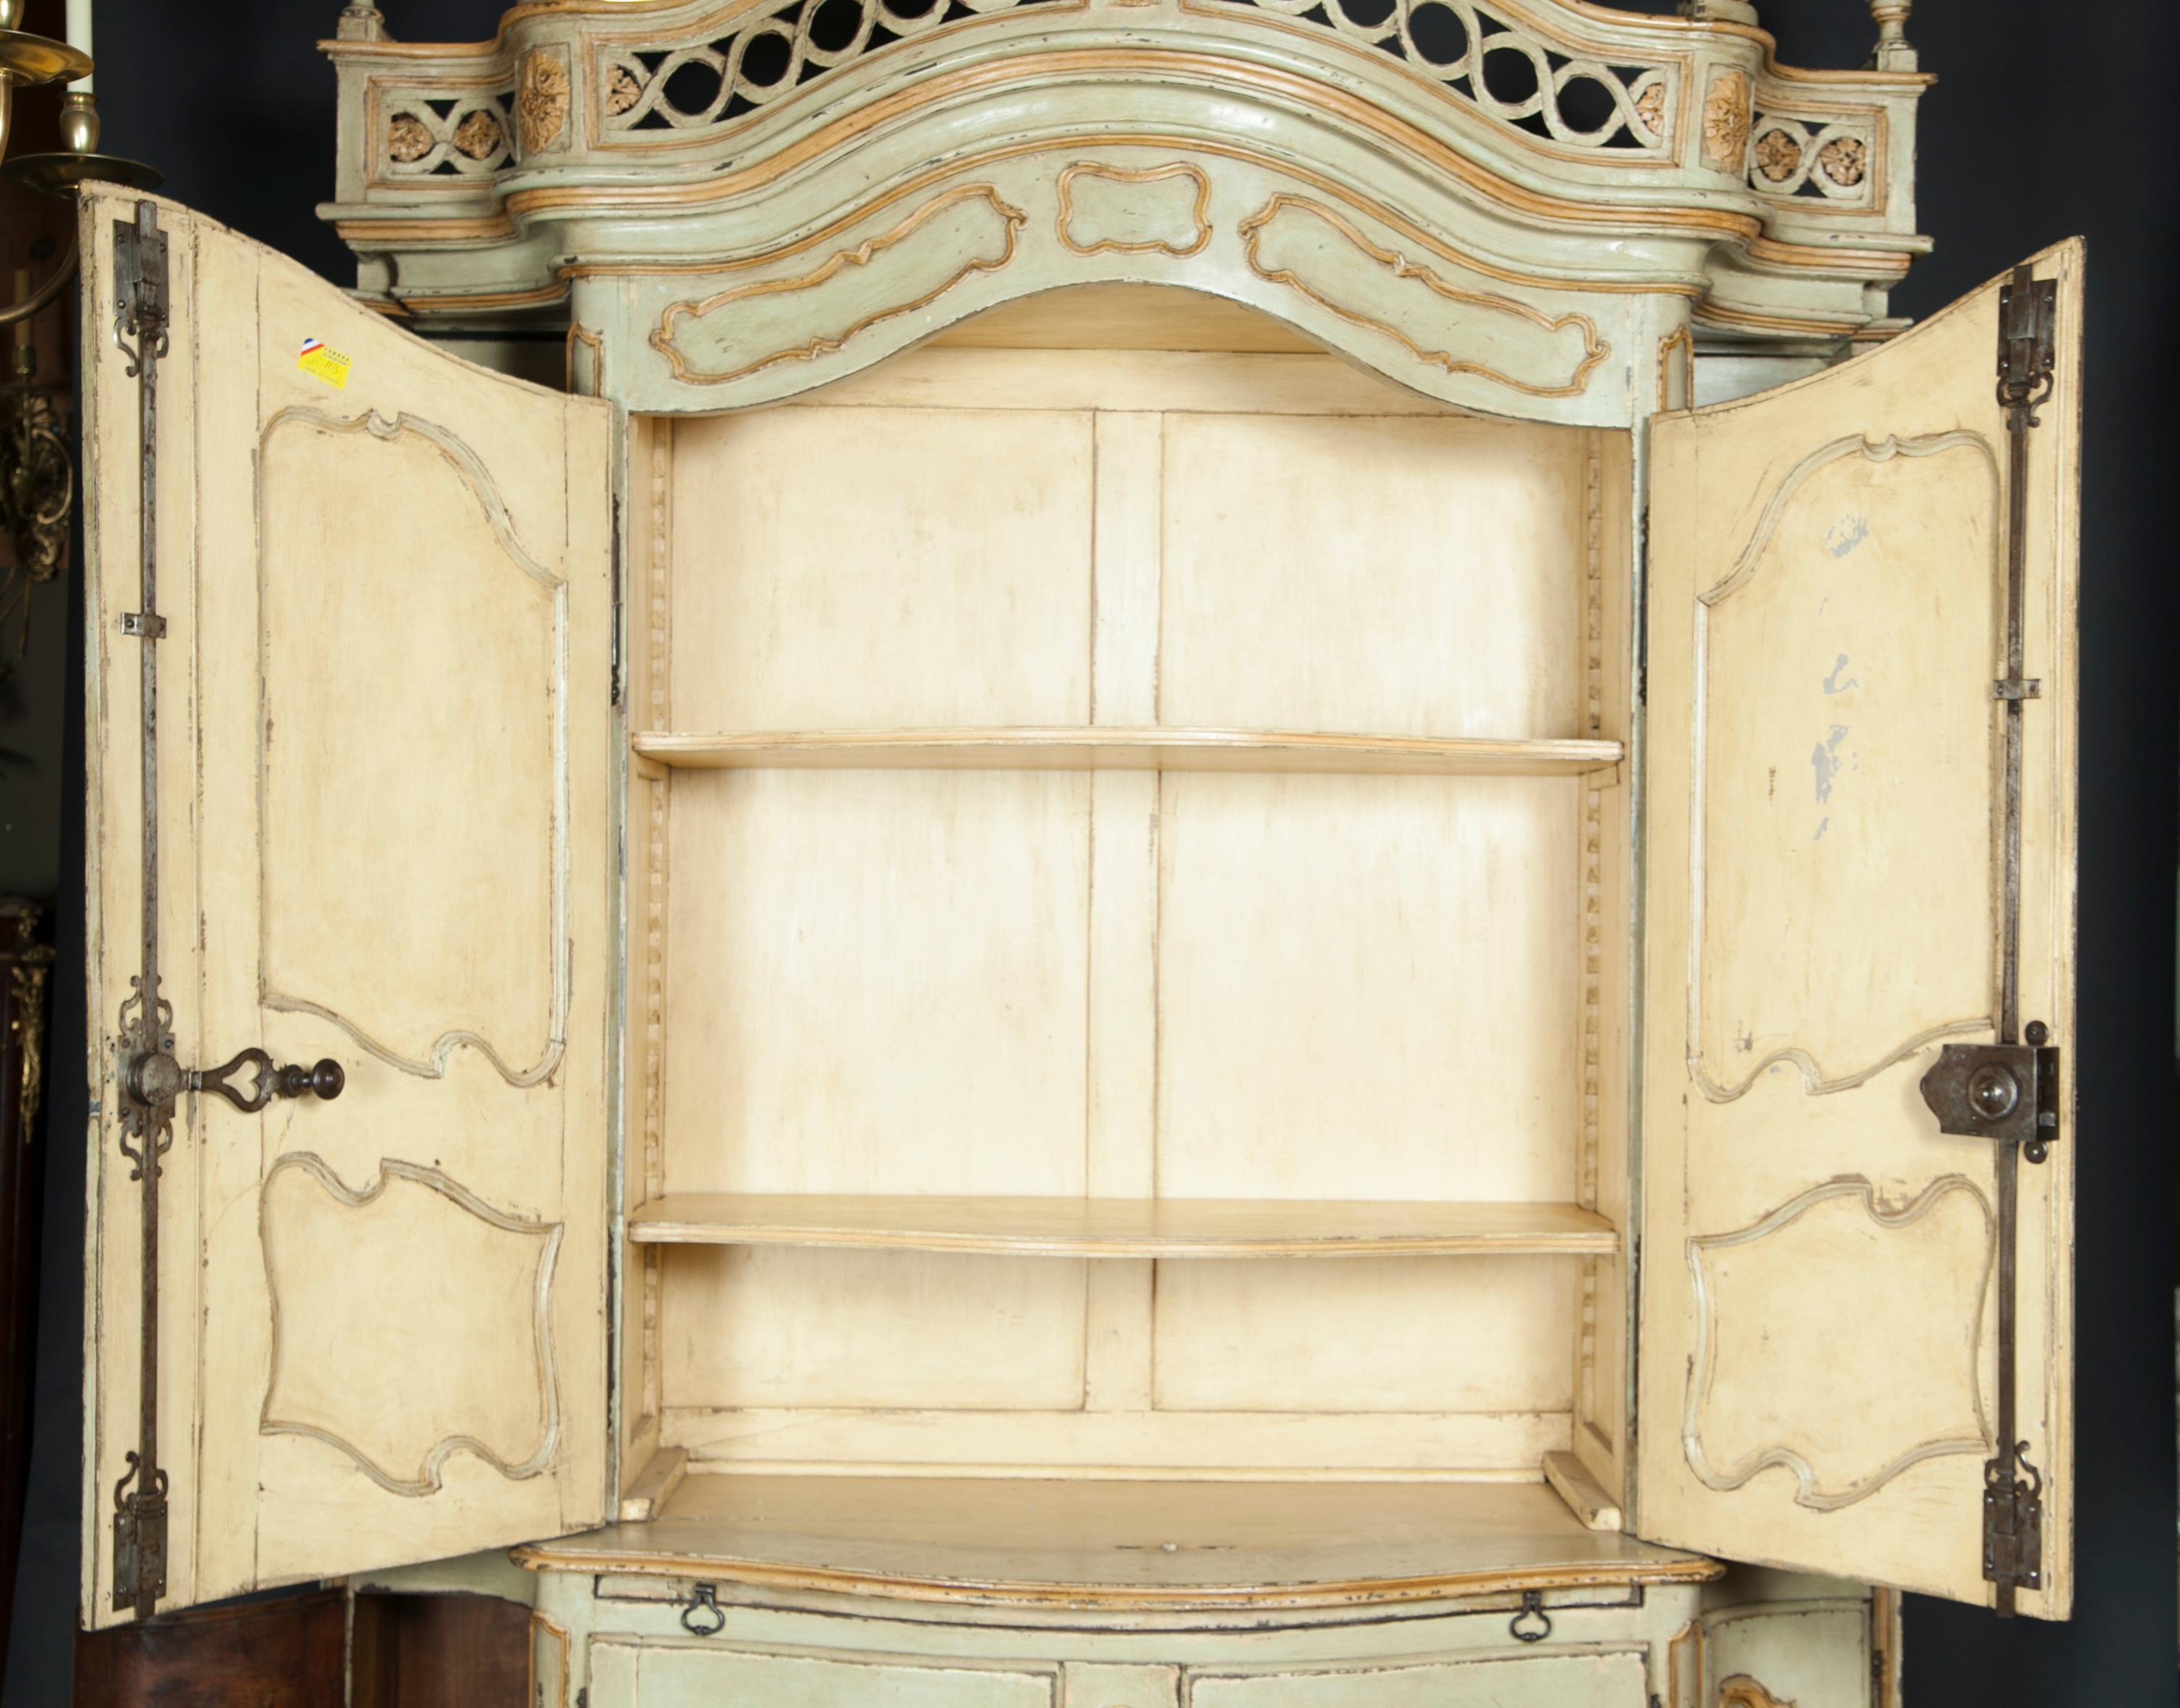 This early 18th century painted Buffet a Deux Corps is truly immaculate. The piece is a true period piece, made in the Regence era when Louis XV was too young of age to rule so the country was ruled temporarily by King Phillipe D’Orleans. The